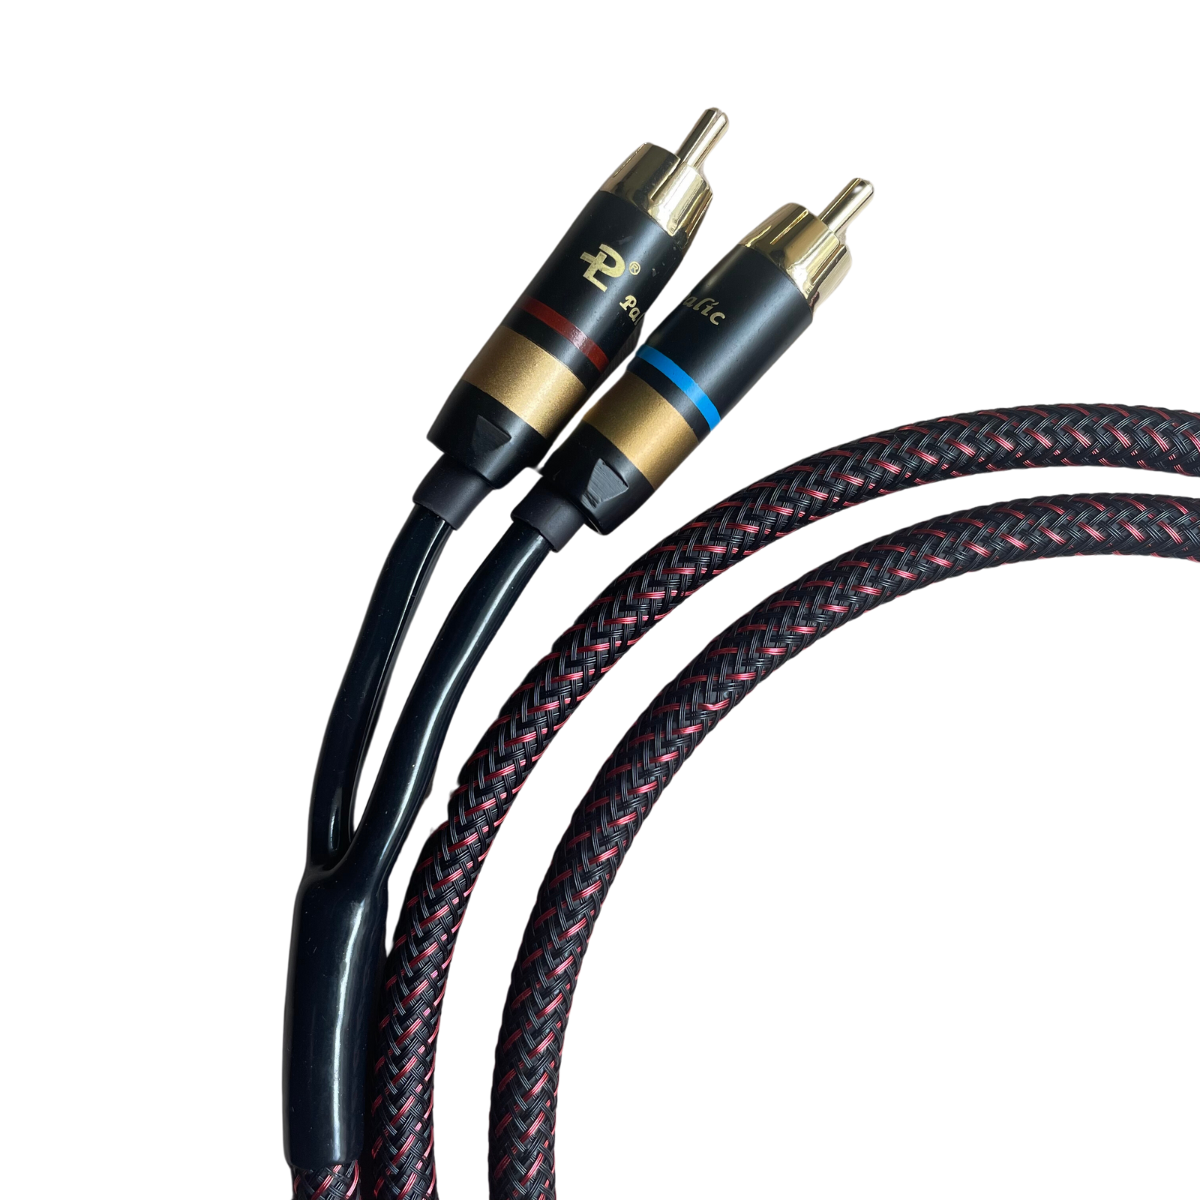 EarAudio Premium Dual RCA To 4.4mm Male Interconnects Cable